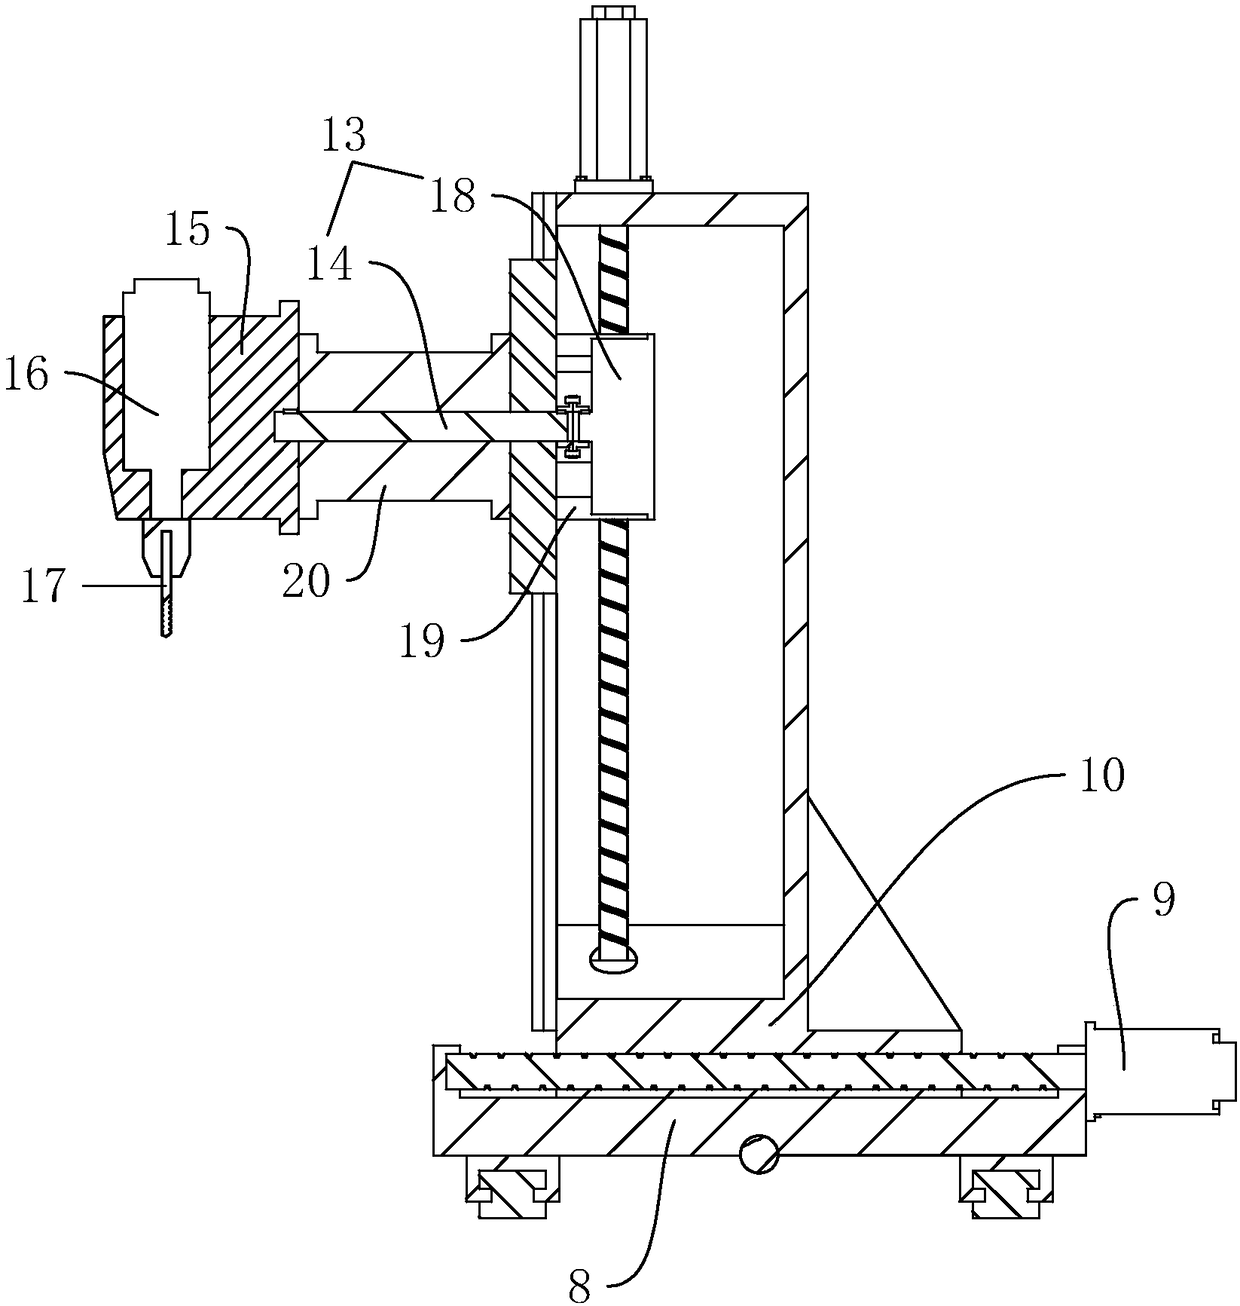 Large-power turning and milling composite machine tool